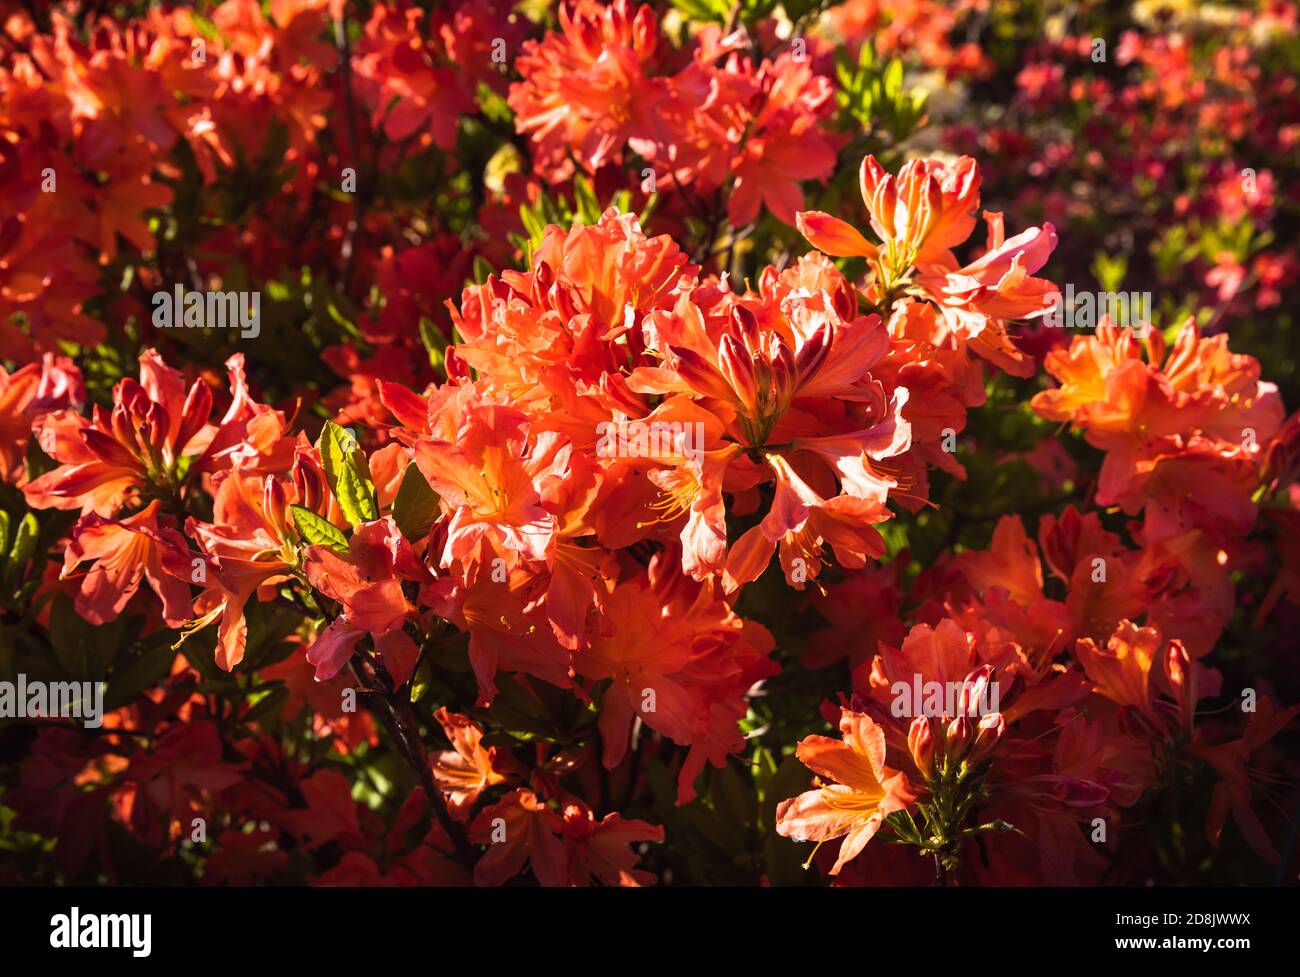 Rhododendron plants in bloom with flowers of different colors. Azalea bushes in the park with different flower colors. Rhododendron plants in bloom. R Stock Photo